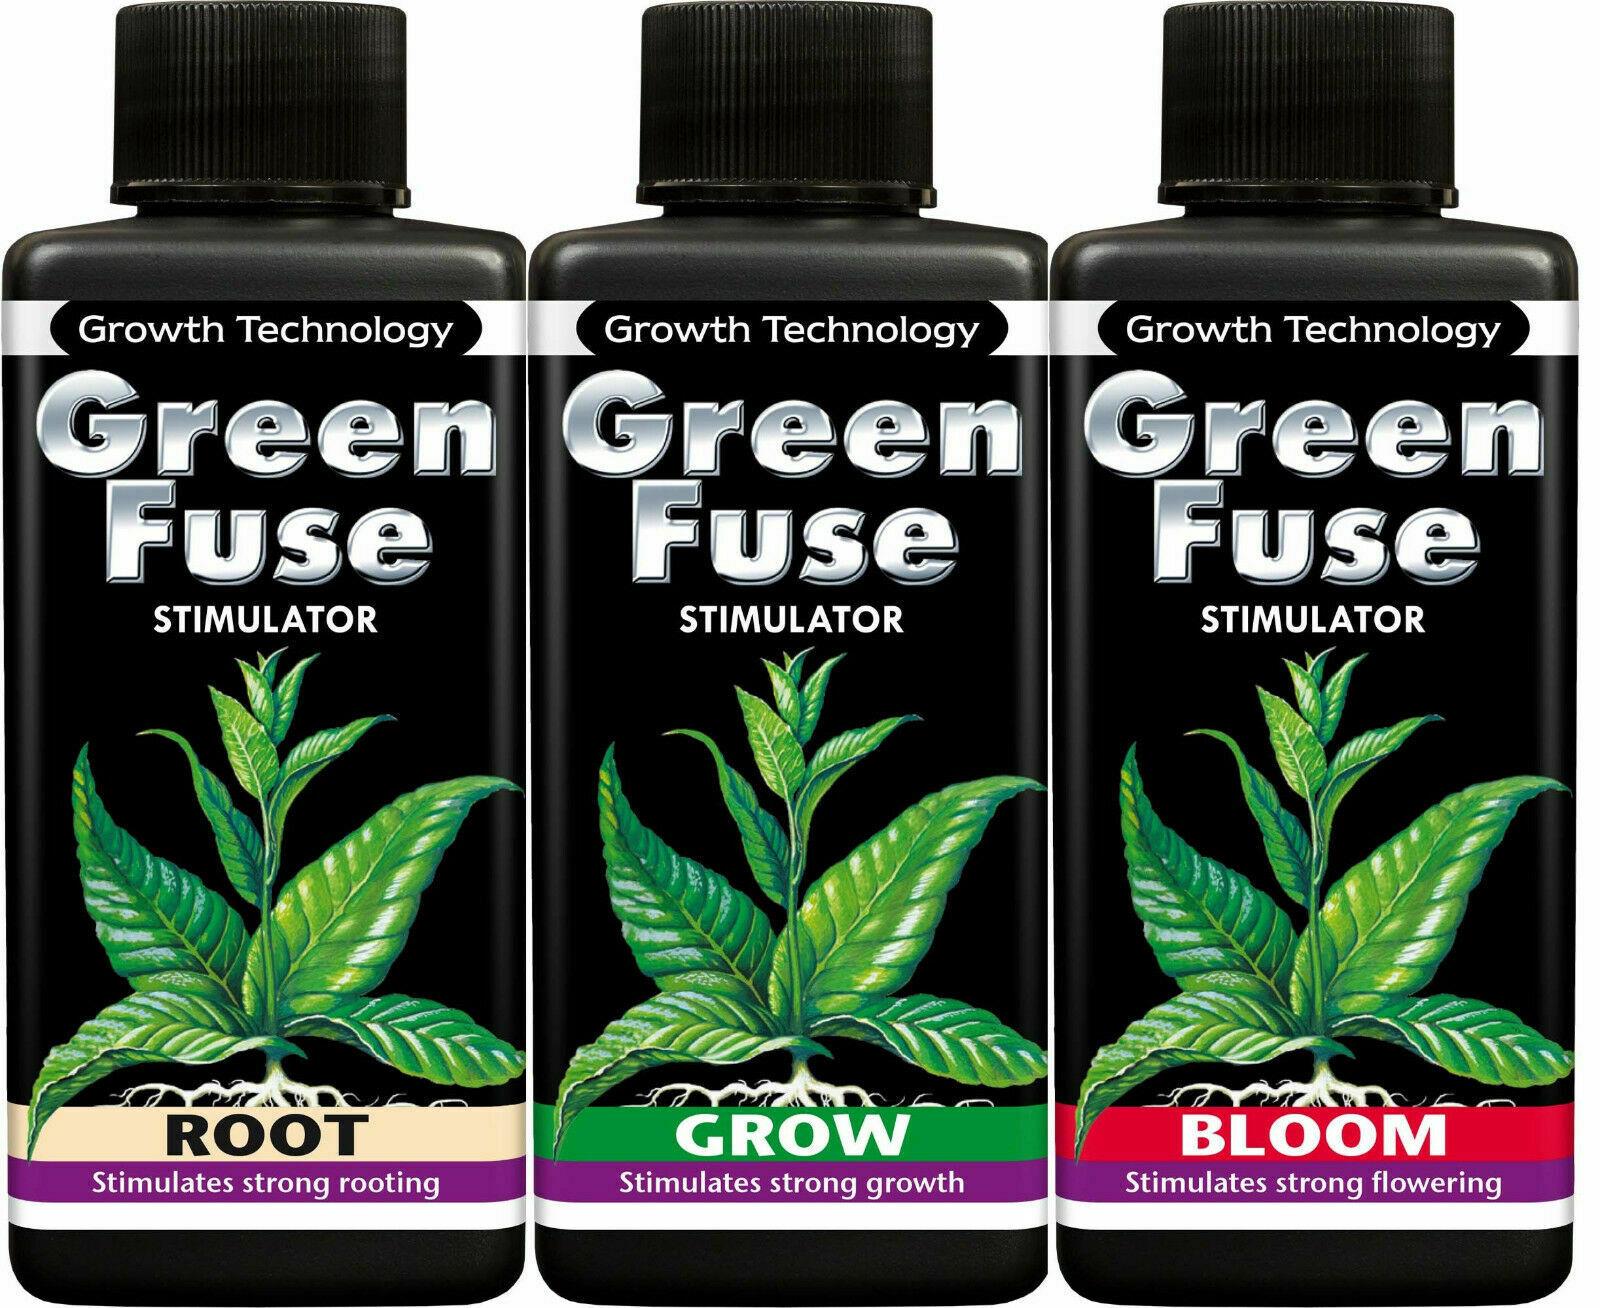 Growth Technology Green Fuse Root+Grow+Bloom Bundle